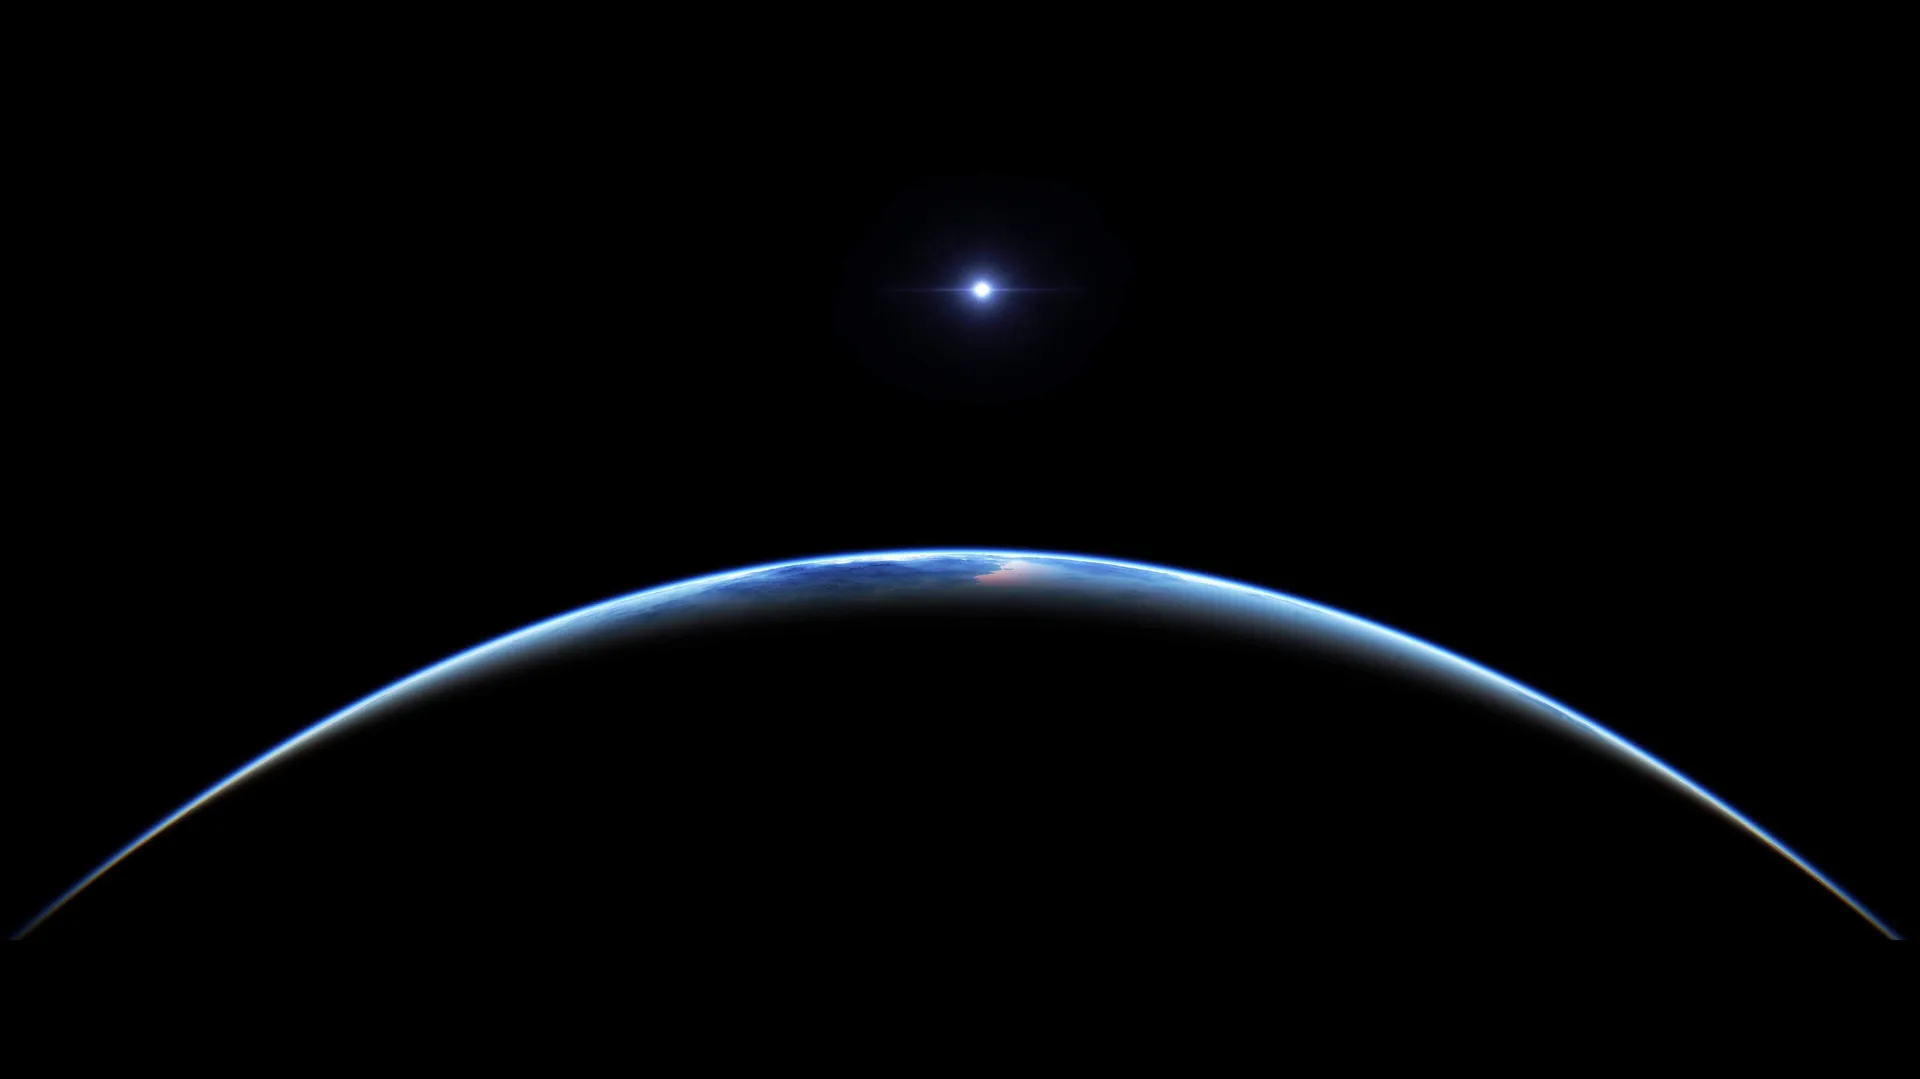  4k Space Wallpapers Earth at night